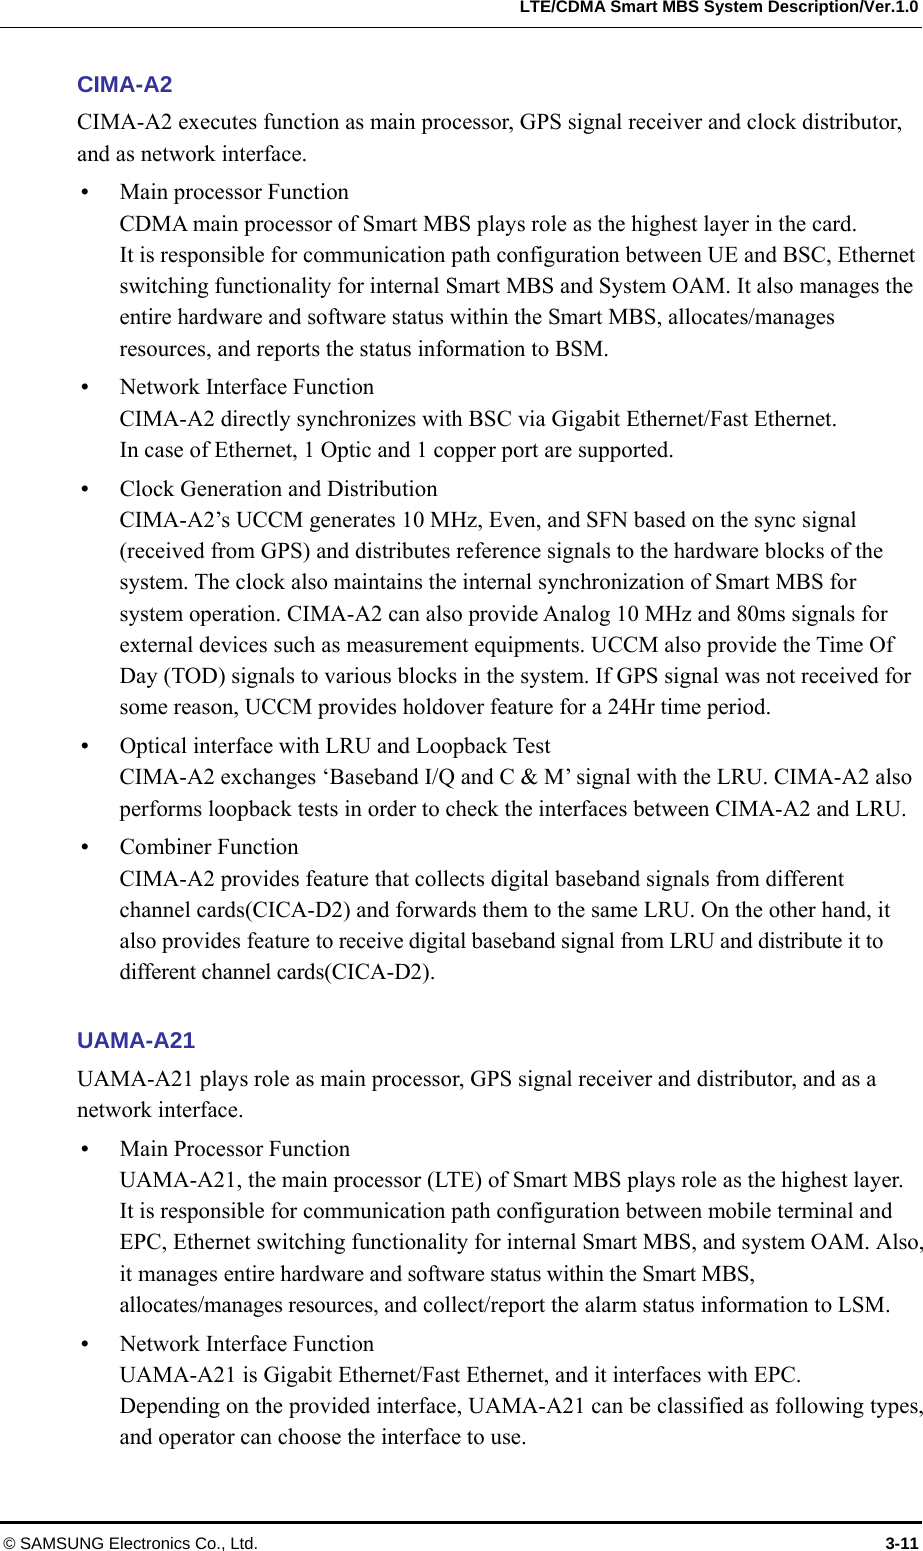   LTE/CDMA Smart MBS System Description/Ver.1.0 © SAMSUNG Electronics Co., Ltd.  3-11 CIMA-A2 CIMA-A2 executes function as main processor, GPS signal receiver and clock distributor, and as network interface.  Main processor Function CDMA main processor of Smart MBS plays role as the highest layer in the card.   It is responsible for communication path configuration between UE and BSC, Ethernet switching functionality for internal Smart MBS and System OAM. It also manages the entire hardware and software status within the Smart MBS, allocates/manages resources, and reports the status information to BSM.  Network Interface Function CIMA-A2 directly synchronizes with BSC via Gigabit Ethernet/Fast Ethernet.   In case of Ethernet, 1 Optic and 1 copper port are supported.  Clock Generation and Distribution CIMA-A2’s UCCM generates 10 MHz, Even, and SFN based on the sync signal (received from GPS) and distributes reference signals to the hardware blocks of the system. The clock also maintains the internal synchronization of Smart MBS for system operation. CIMA-A2 can also provide Analog 10 MHz and 80ms signals for external devices such as measurement equipments. UCCM also provide the Time Of Day (TOD) signals to various blocks in the system. If GPS signal was not received for some reason, UCCM provides holdover feature for a 24Hr time period.    Optical interface with LRU and Loopback Test   CIMA-A2 exchanges ‘Baseband I/Q and C &amp; M’ signal with the LRU. CIMA-A2 also performs loopback tests in order to check the interfaces between CIMA-A2 and LRU.  Combiner Function CIMA-A2 provides feature that collects digital baseband signals from different channel cards(CICA-D2) and forwards them to the same LRU. On the other hand, it also provides feature to receive digital baseband signal from LRU and distribute it to different channel cards(CICA-D2).  UAMA-A21 UAMA-A21 plays role as main processor, GPS signal receiver and distributor, and as a network interface.  Main Processor Function UAMA-A21, the main processor (LTE) of Smart MBS plays role as the highest layer. It is responsible for communication path configuration between mobile terminal and EPC, Ethernet switching functionality for internal Smart MBS, and system OAM. Also, it manages entire hardware and software status within the Smart MBS, allocates/manages resources, and collect/report the alarm status information to LSM.  Network Interface Function UAMA-A21 is Gigabit Ethernet/Fast Ethernet, and it interfaces with EPC. Depending on the provided interface, UAMA-A21 can be classified as following types, and operator can choose the interface to use. 